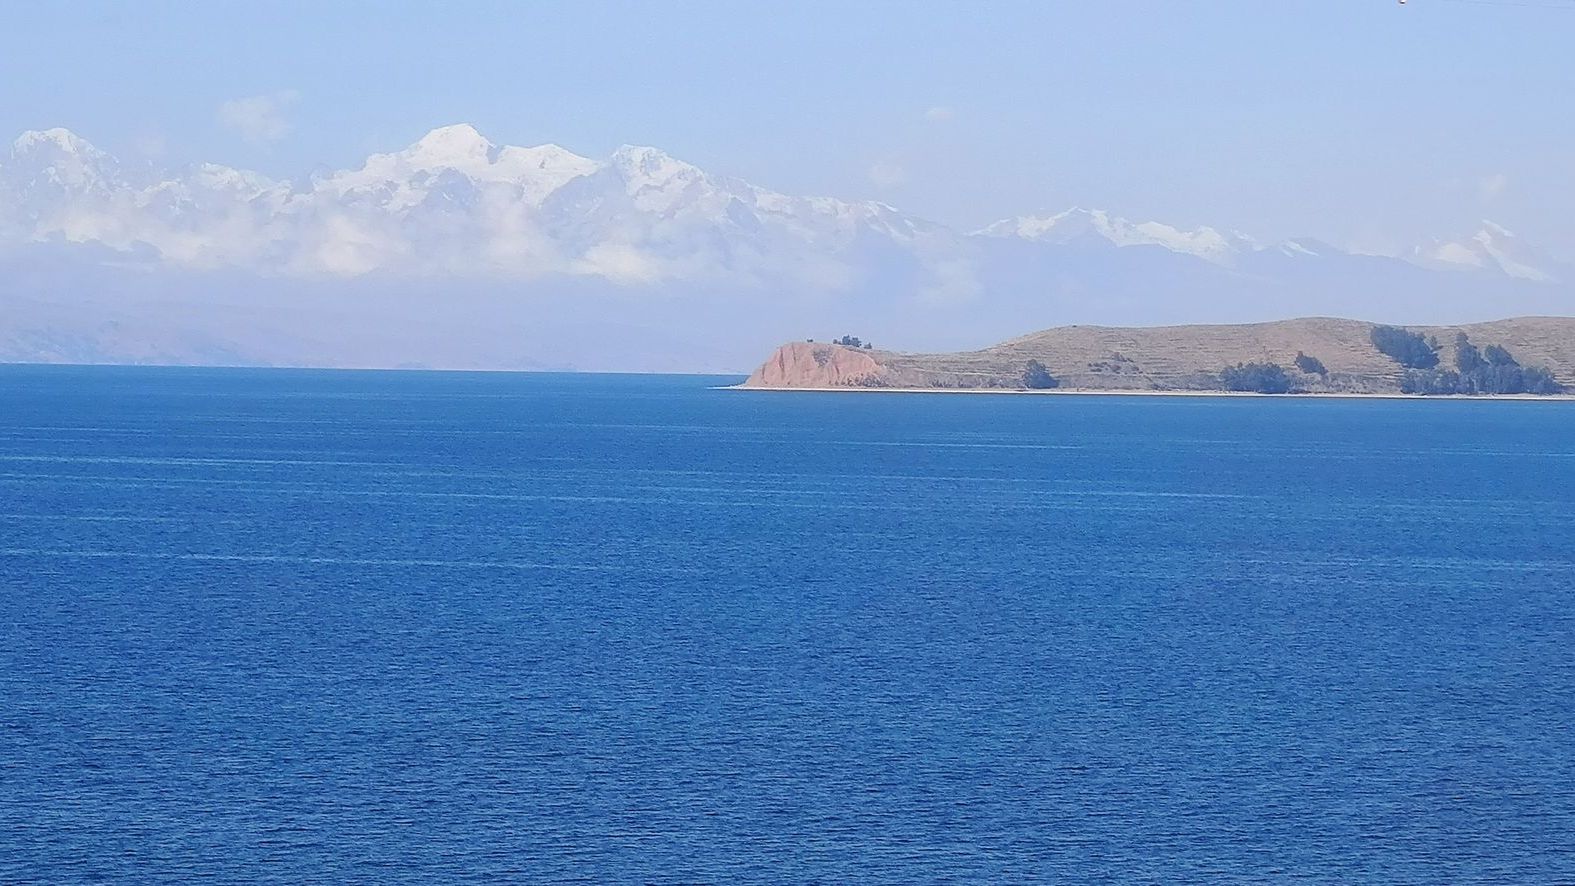 View from the Sun Island in Bolivia